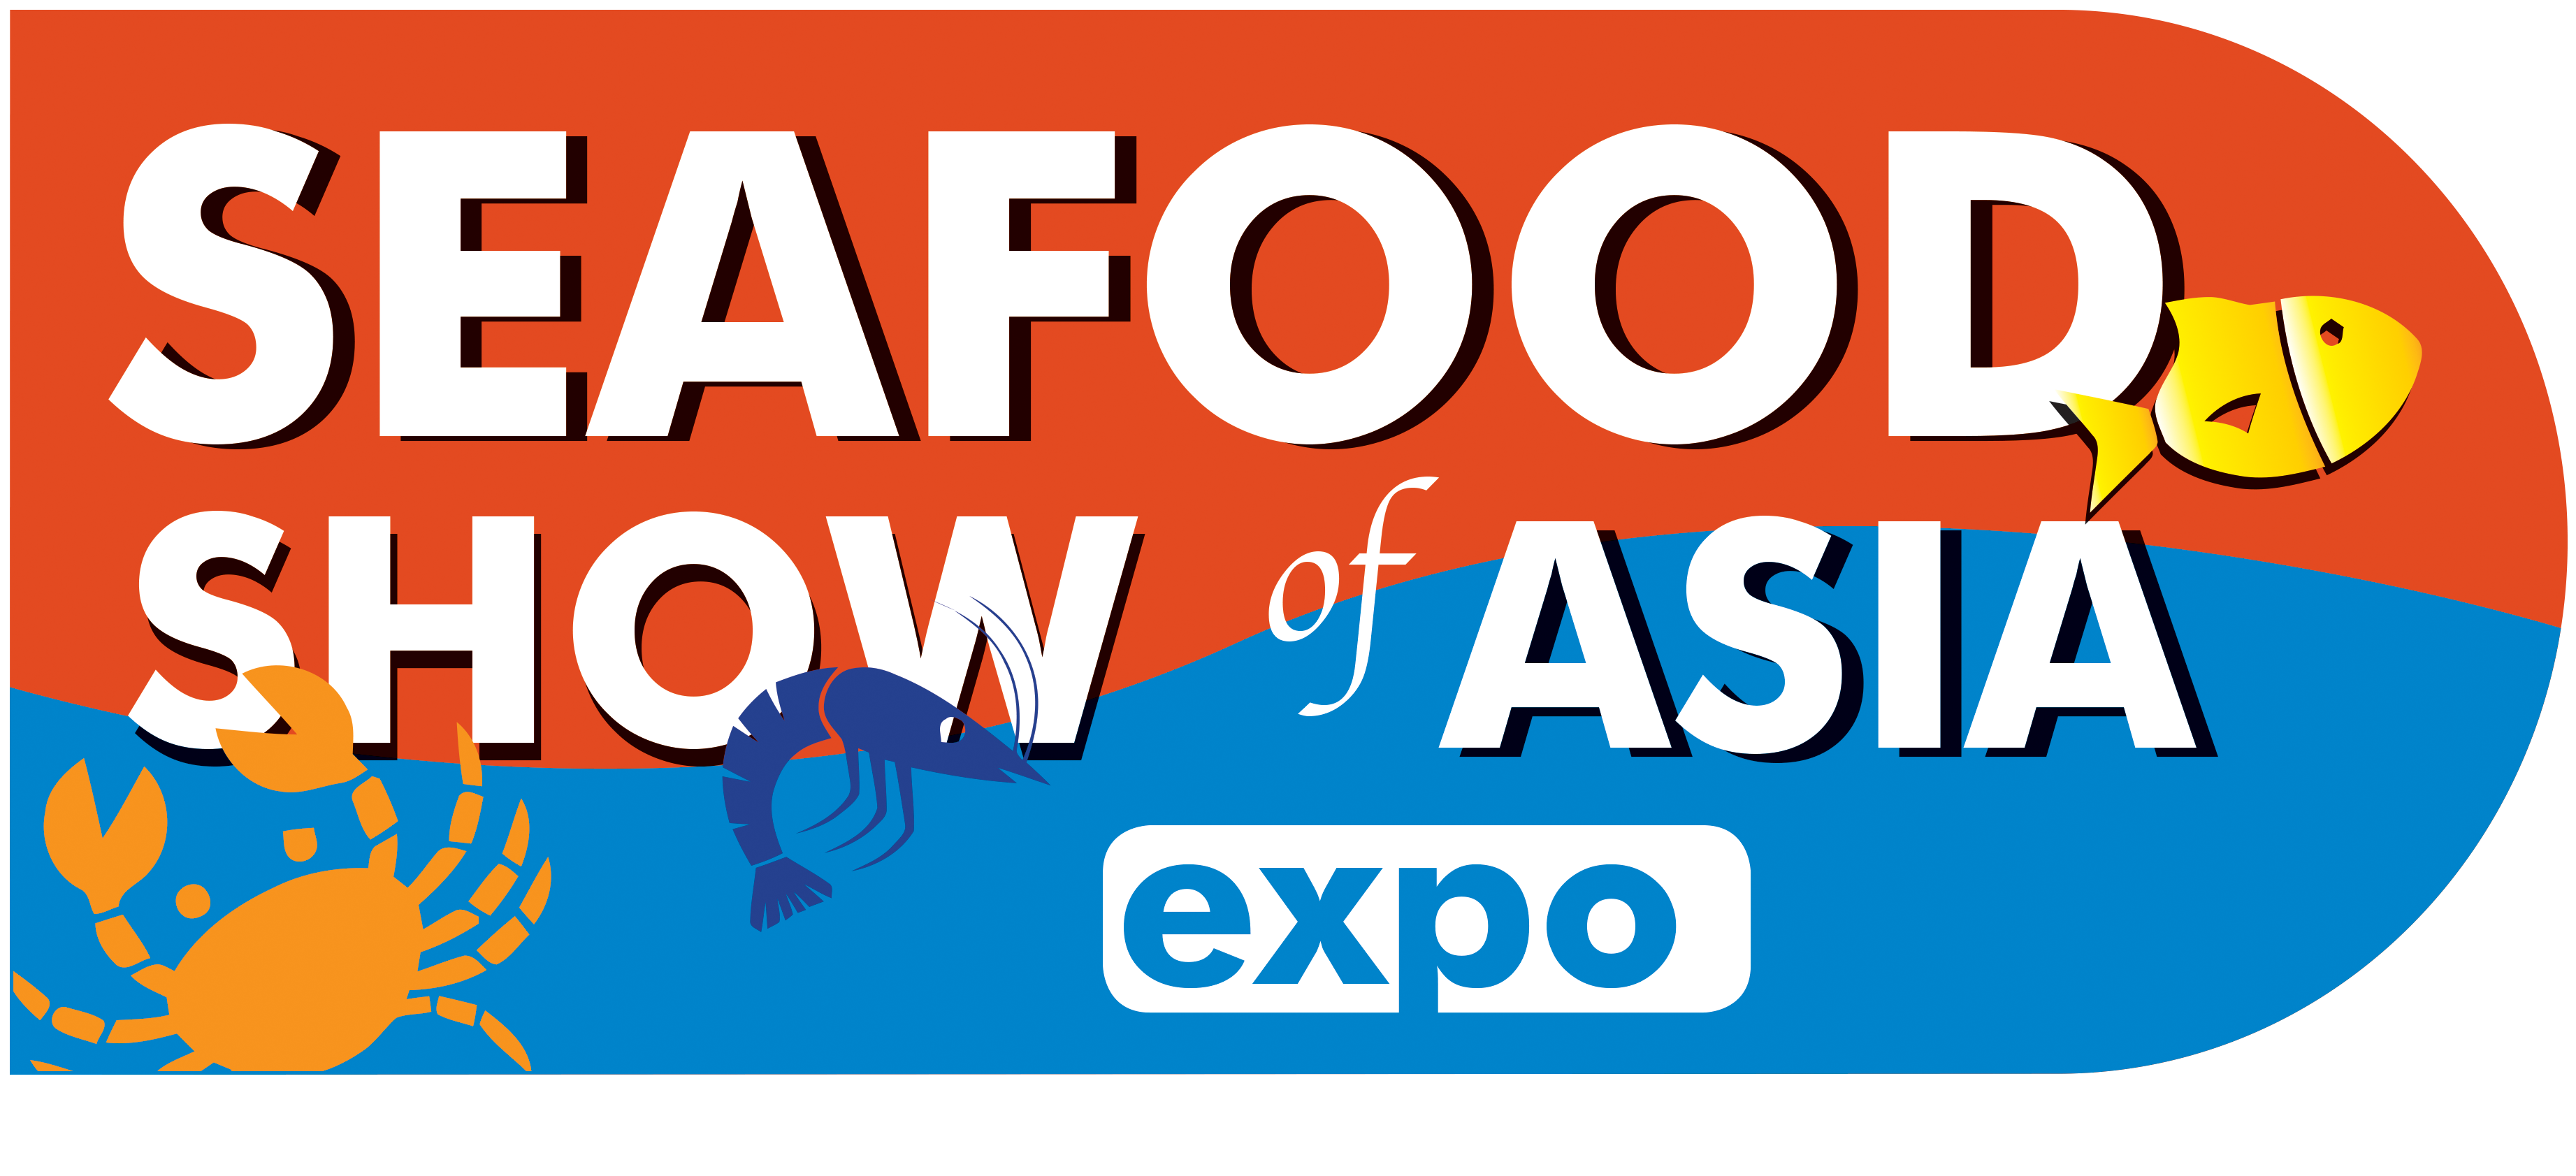 SEAFOOD SHOW OF ASIA EXPO 2023